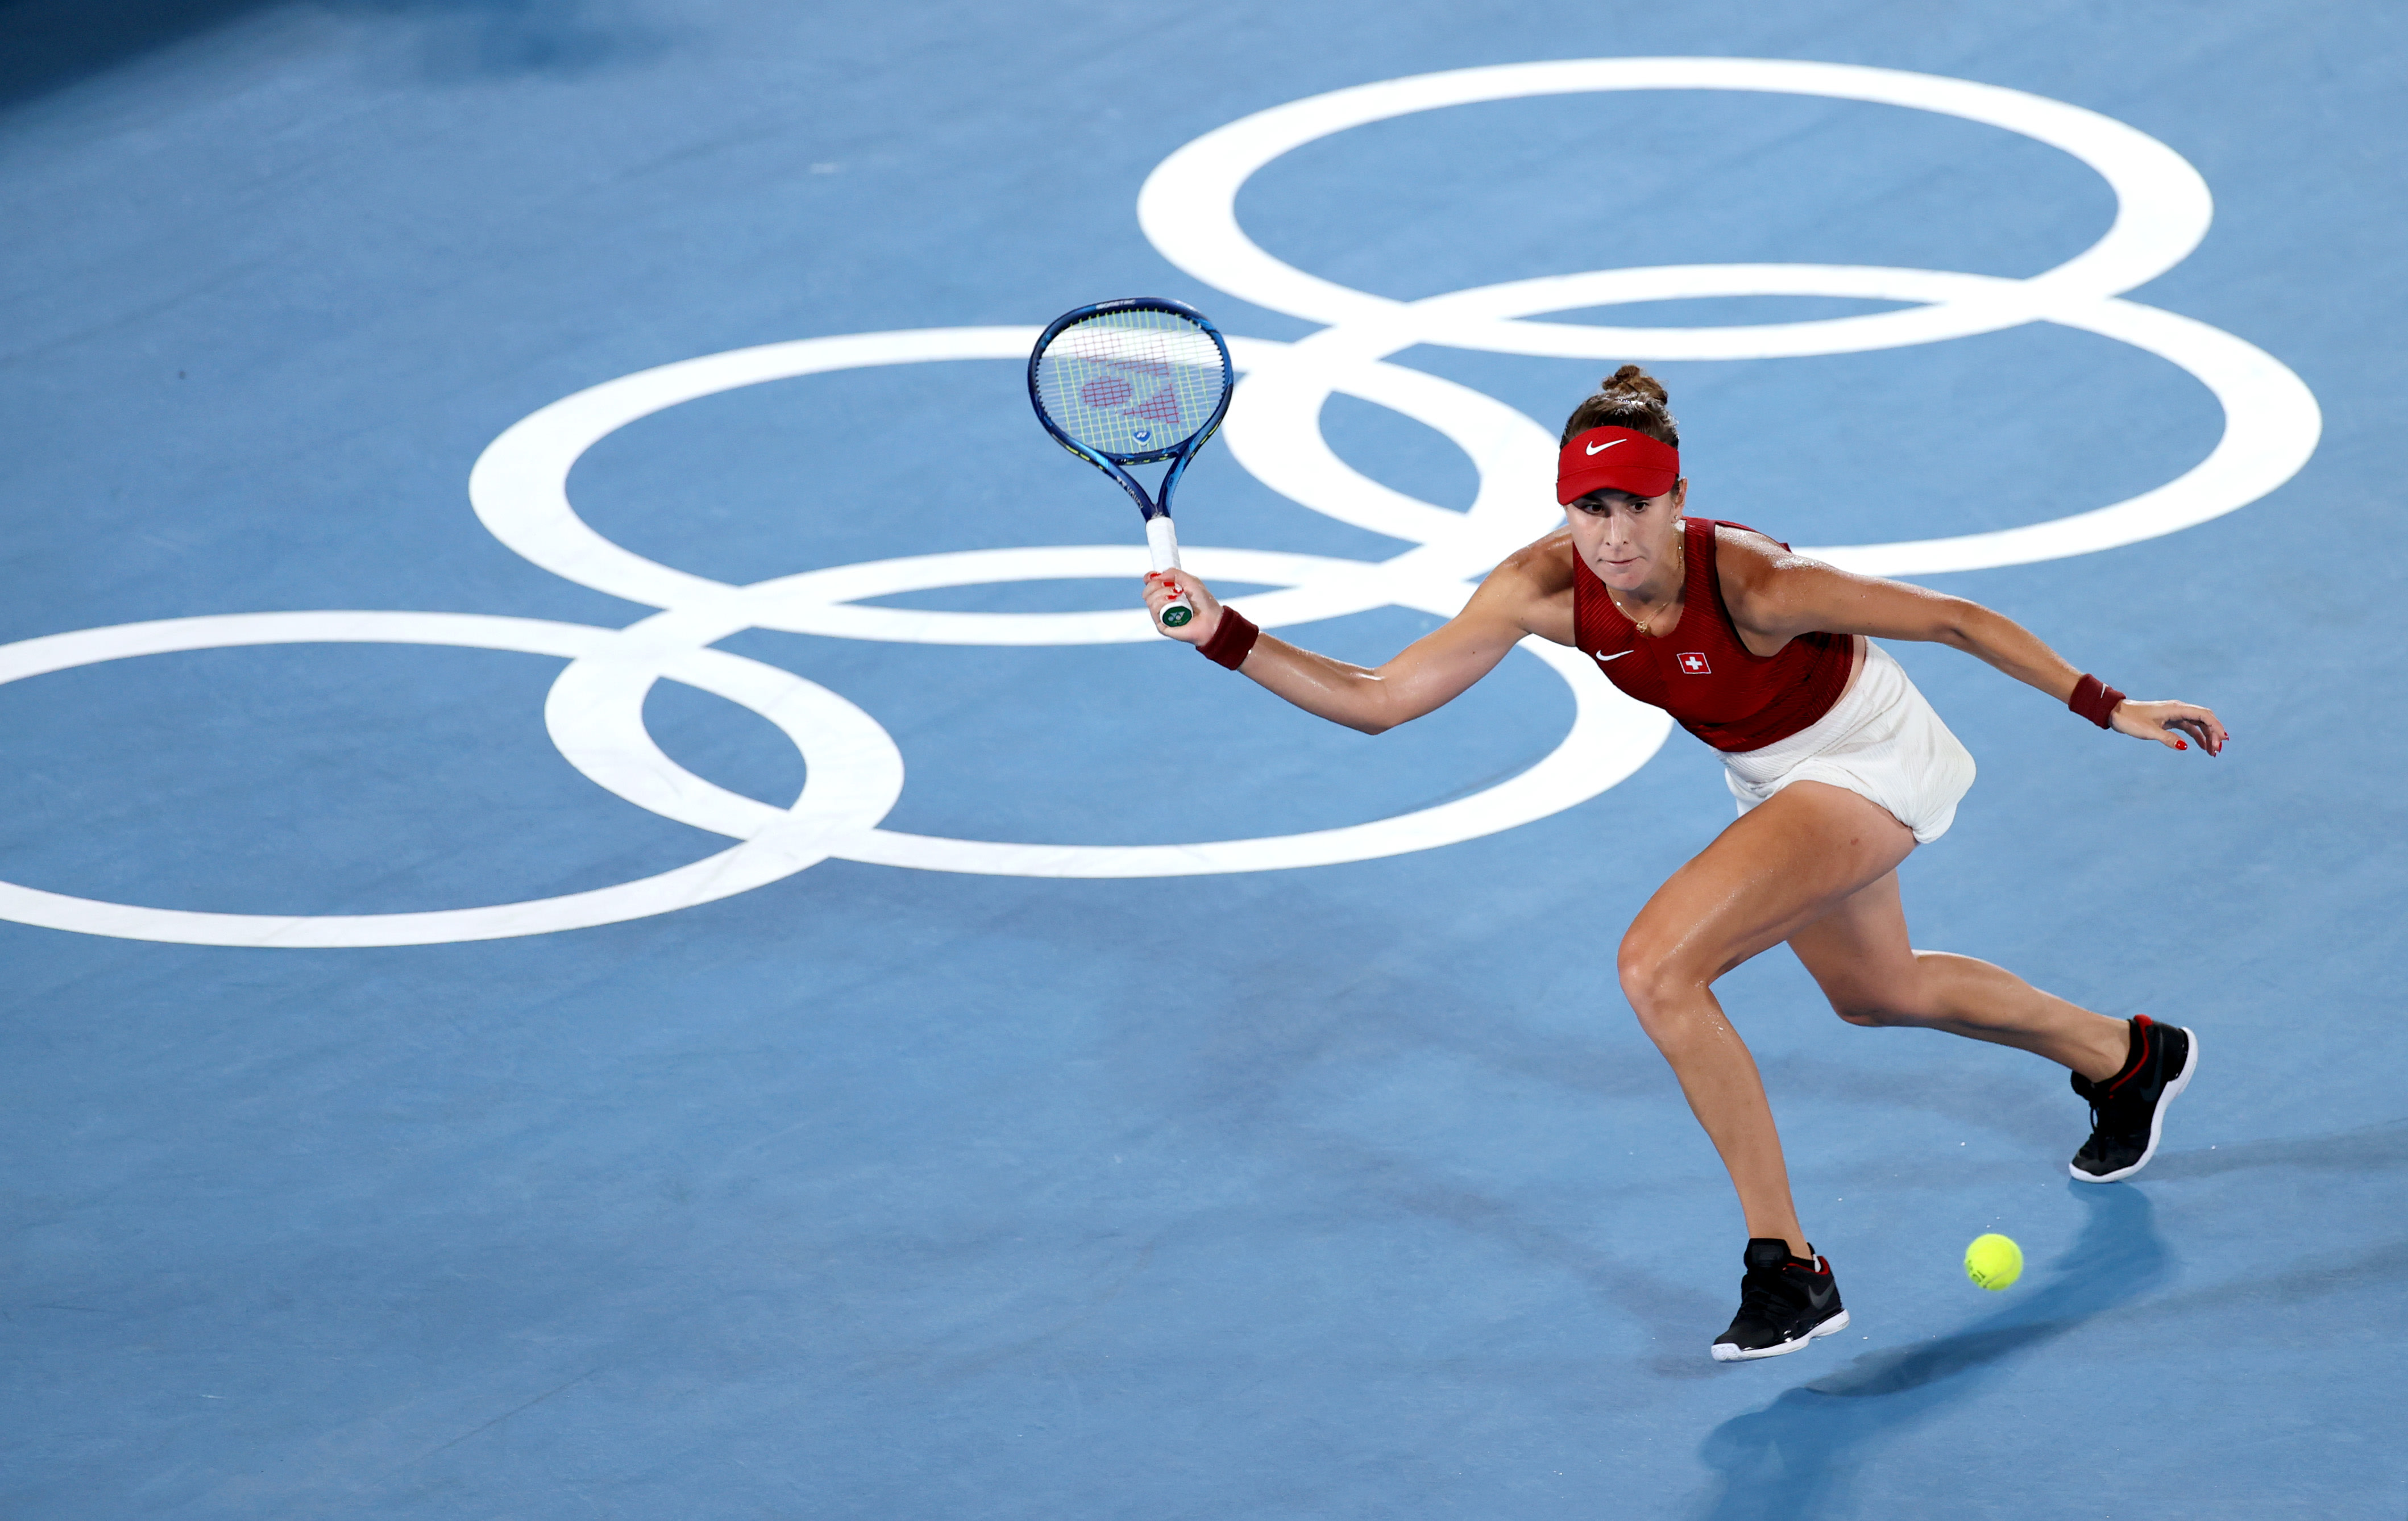 With two medals in Tokyo, can Belinda Bencic set aside rollercoaster tendencies and become elite staple?